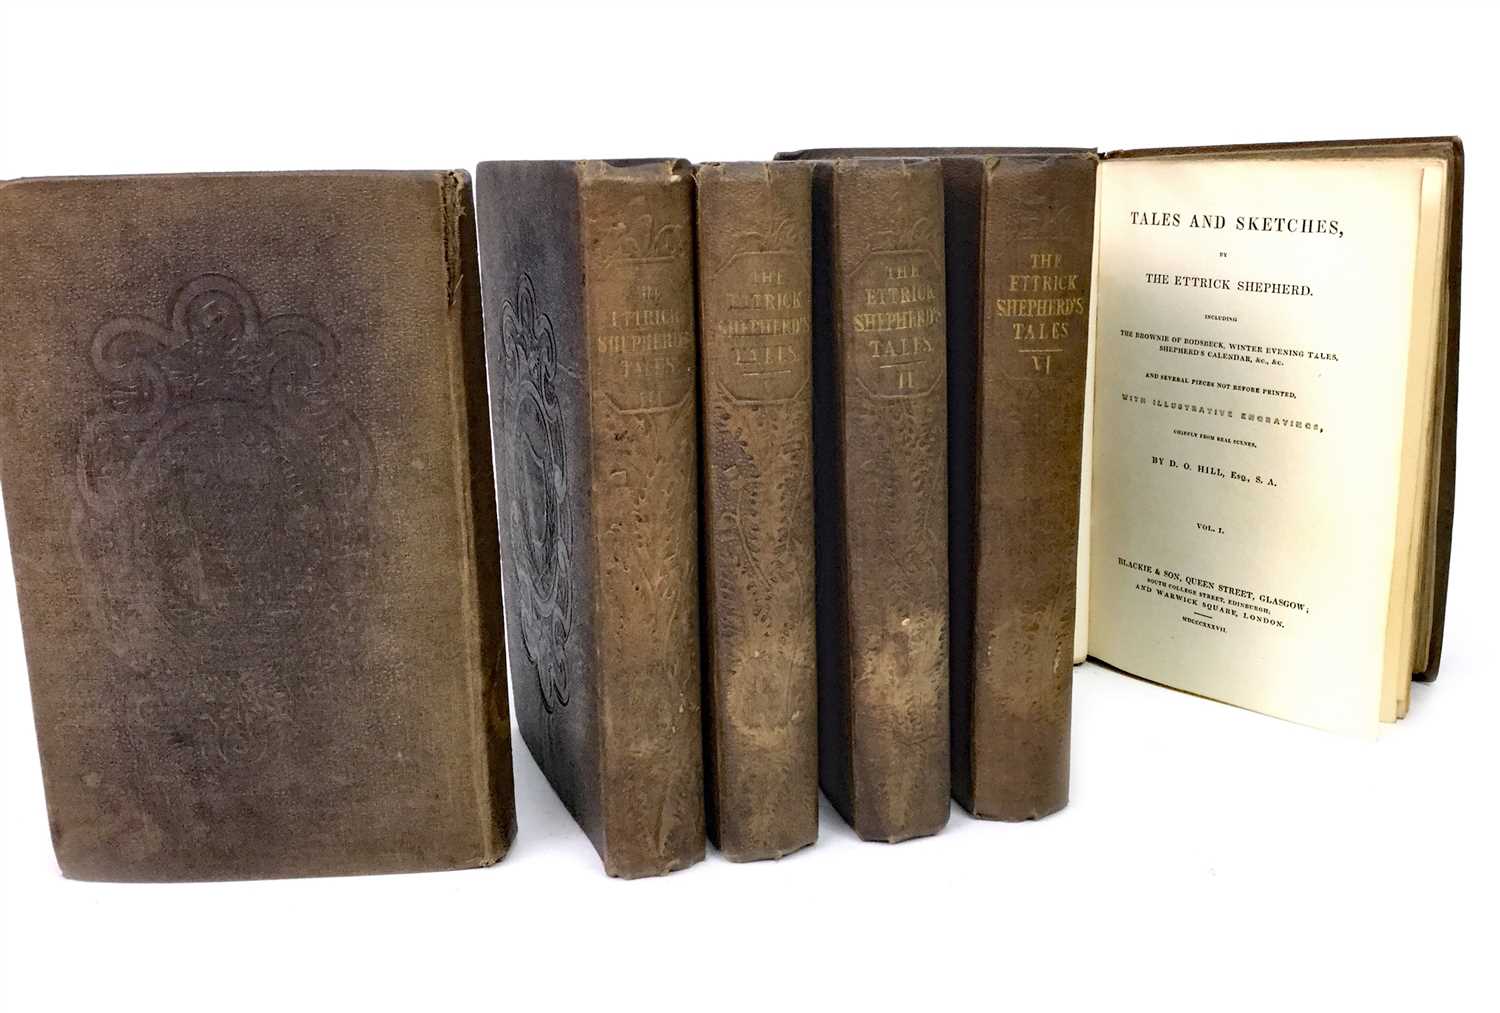 Lot 1596 - TALES AND SKETCHES BY THE ETTRICK SHEPHERD